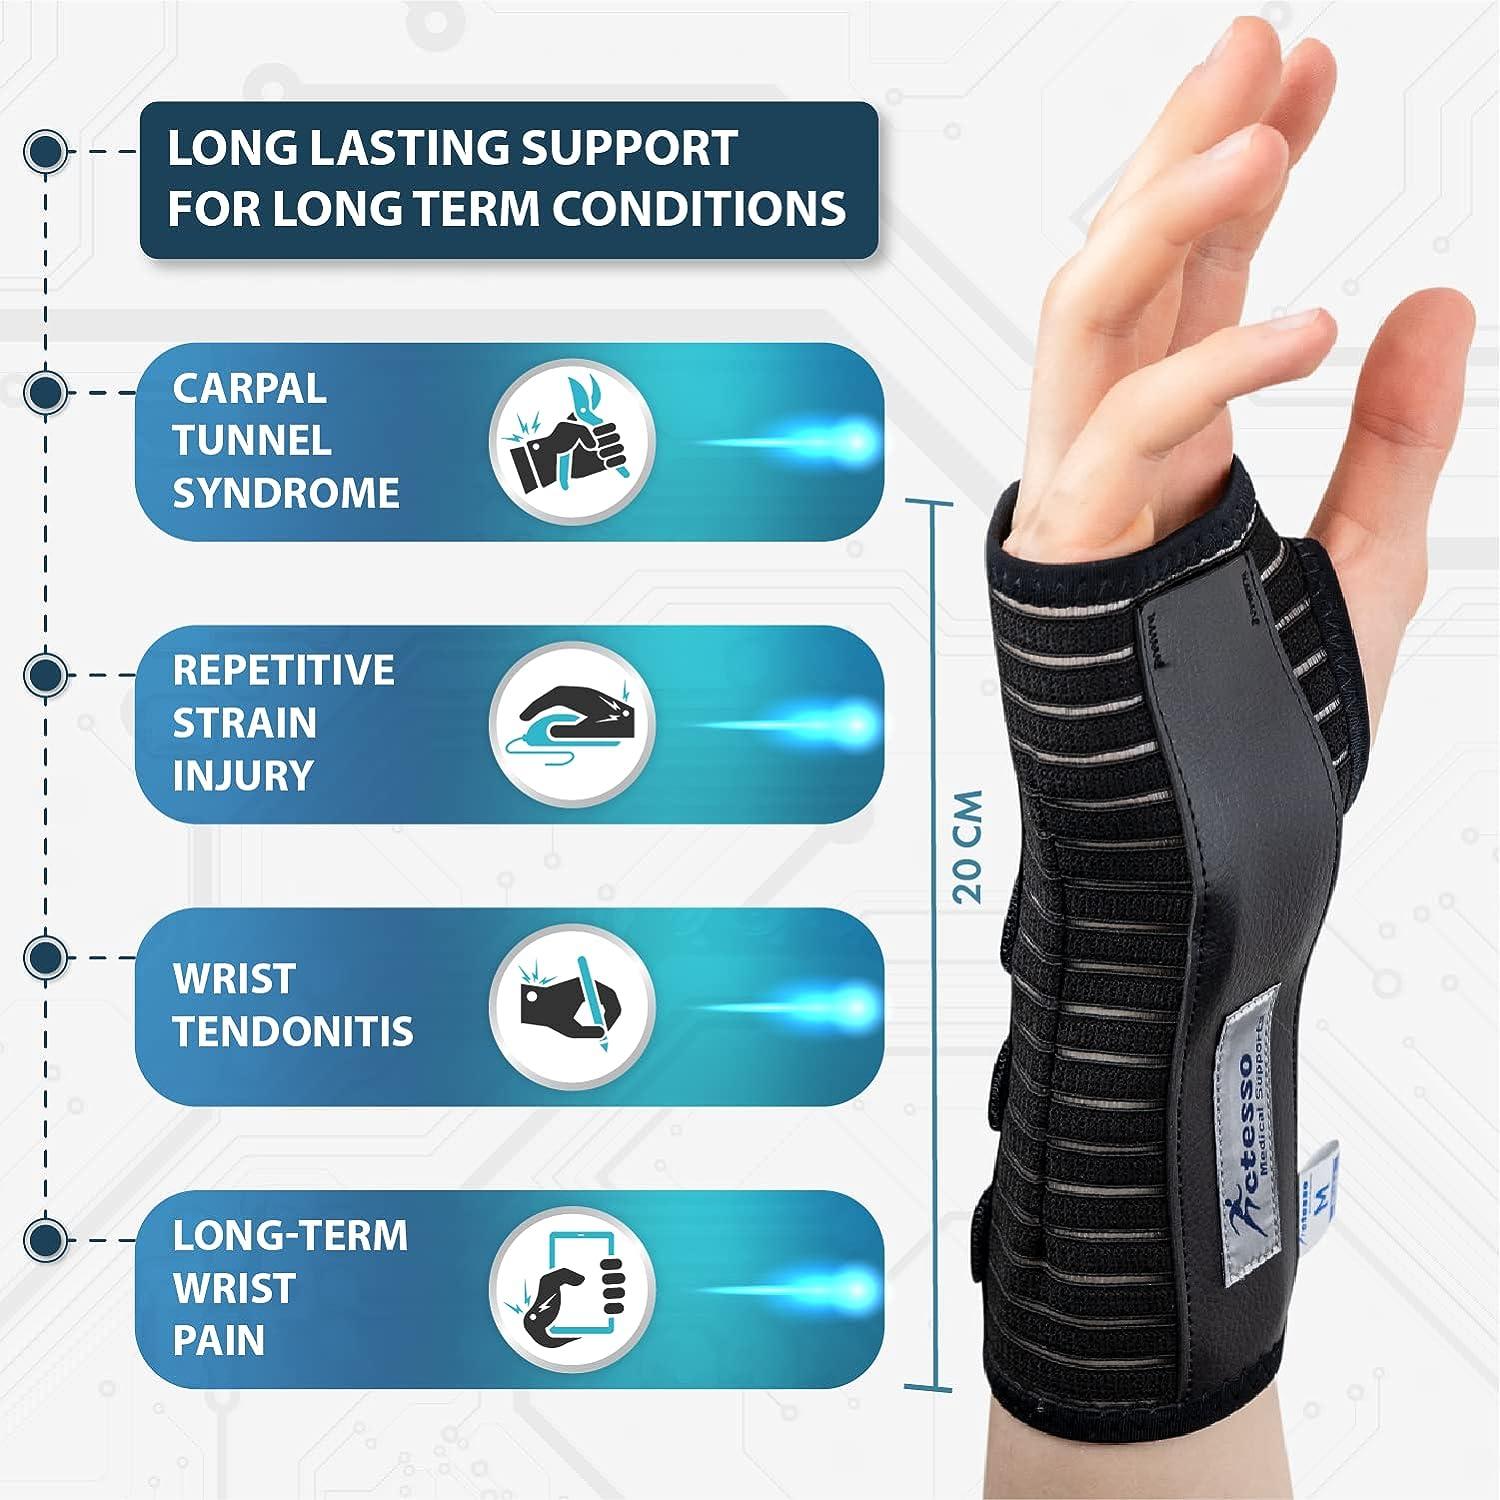 Actesso Elastic Wrist Support with Strap for Sprains, Injury or Sports Use  - Flexibility without Metal Bar - Black, Medium